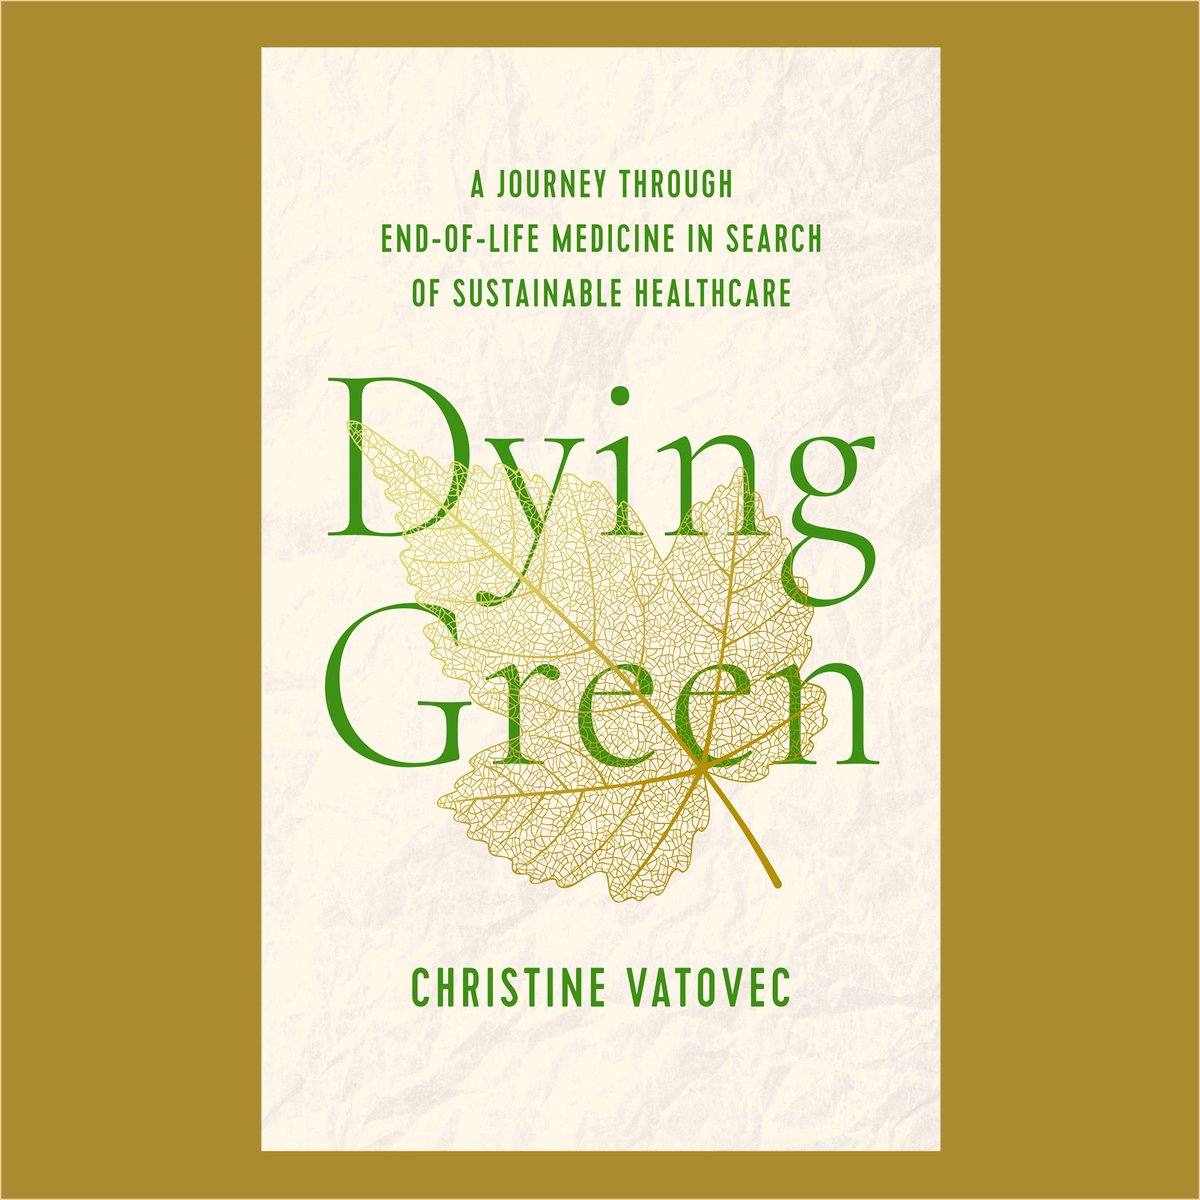 “Dying Green: A Journey through End-of-Life Medicine in Search of Sustainable Health Care”
by Christine Vatovec

rutgersuniversitypress.org/dying-green/97…

#NewBookAnnouncement #HealthCare #Environment #PublicHealth